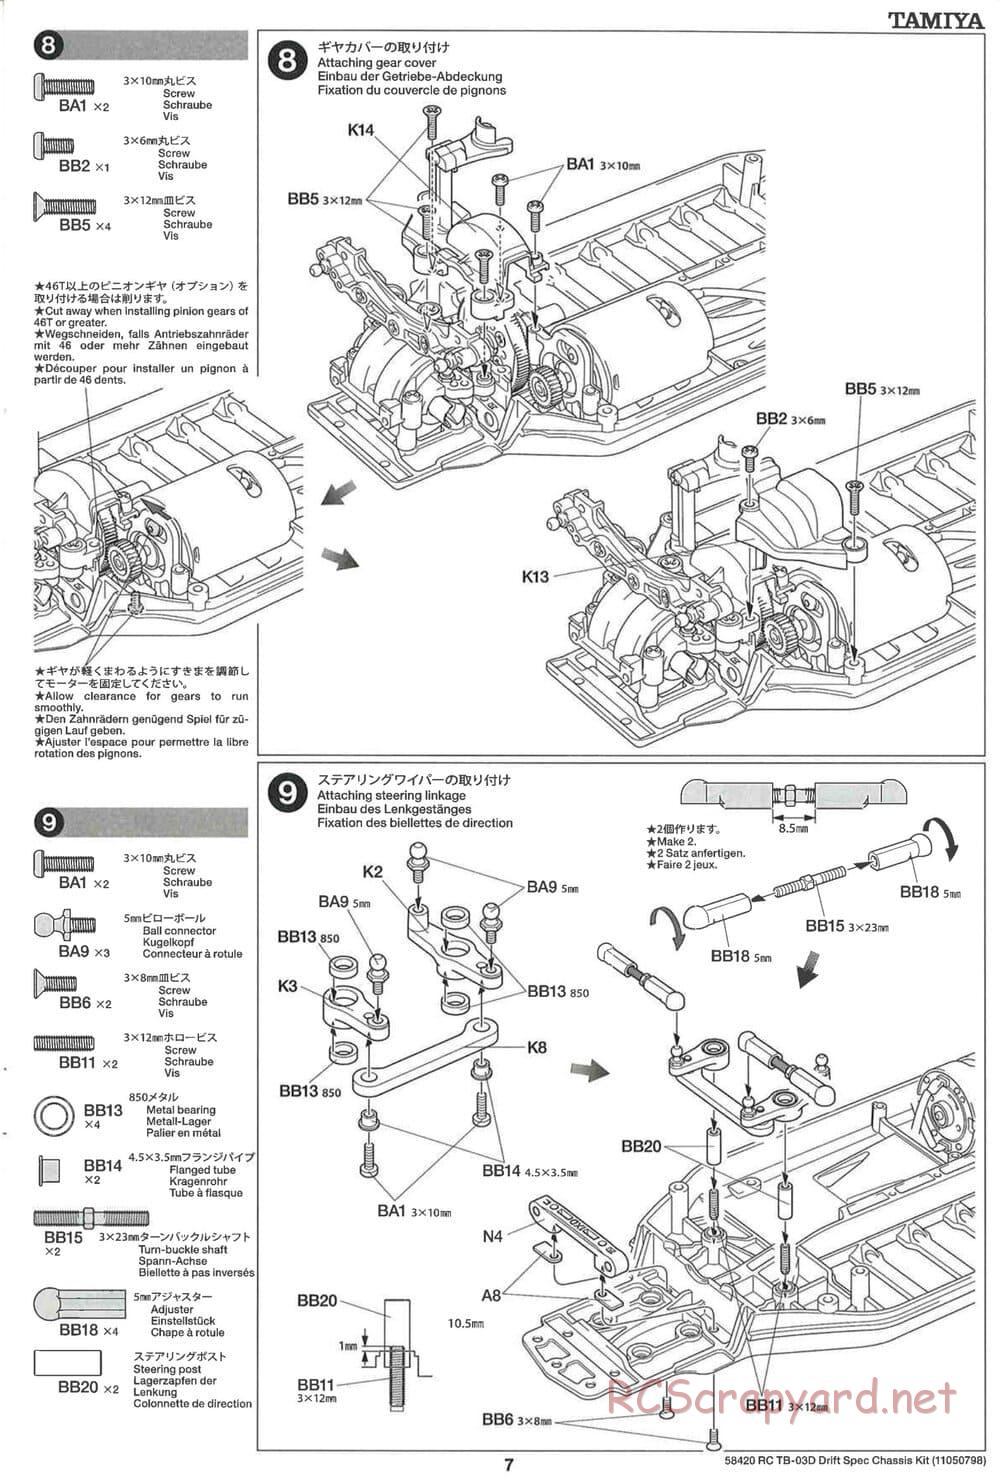 Tamiya - TB-03D HP Drift Spec Chassis - Manual - Page 7